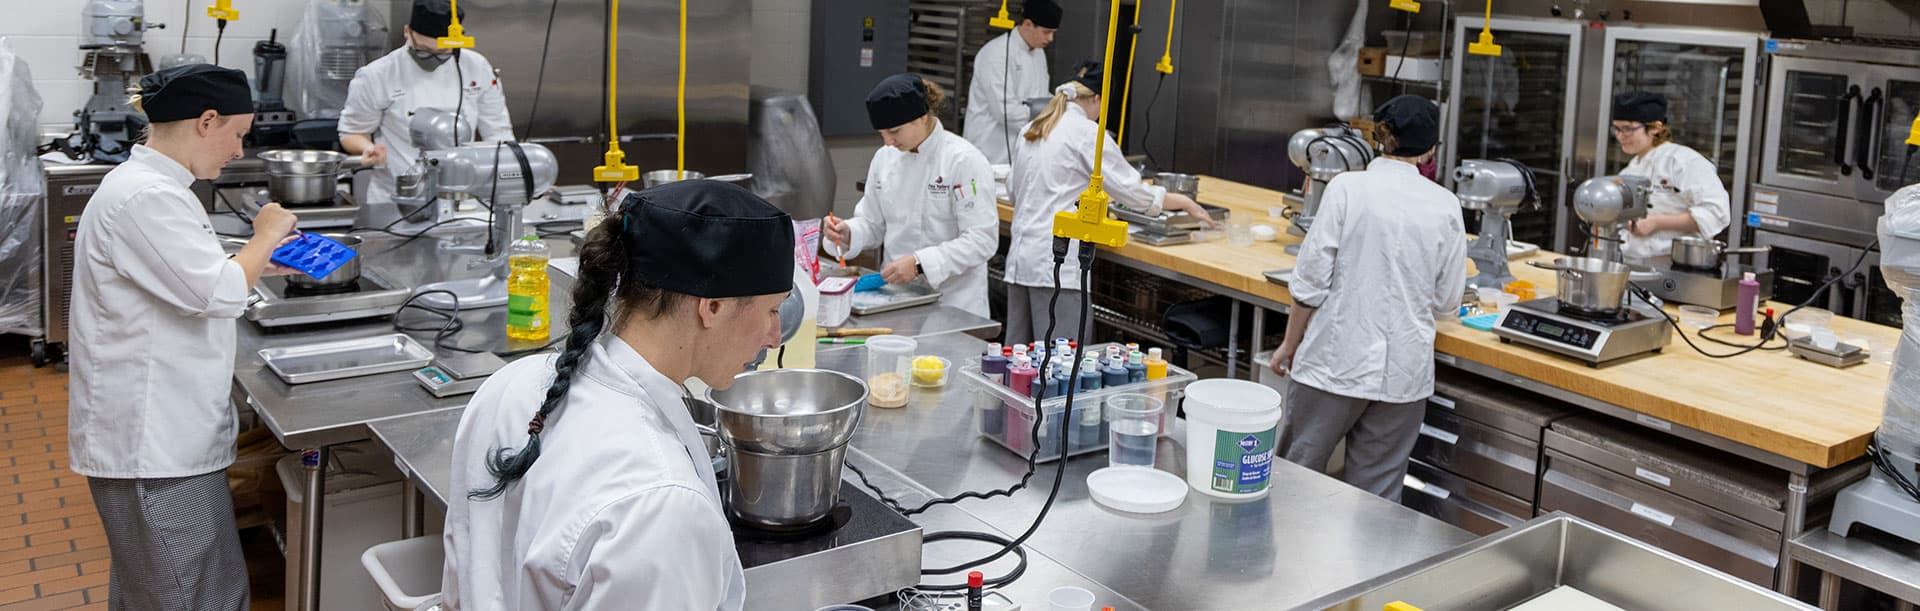 students learning culinary arts in kitchen classroom